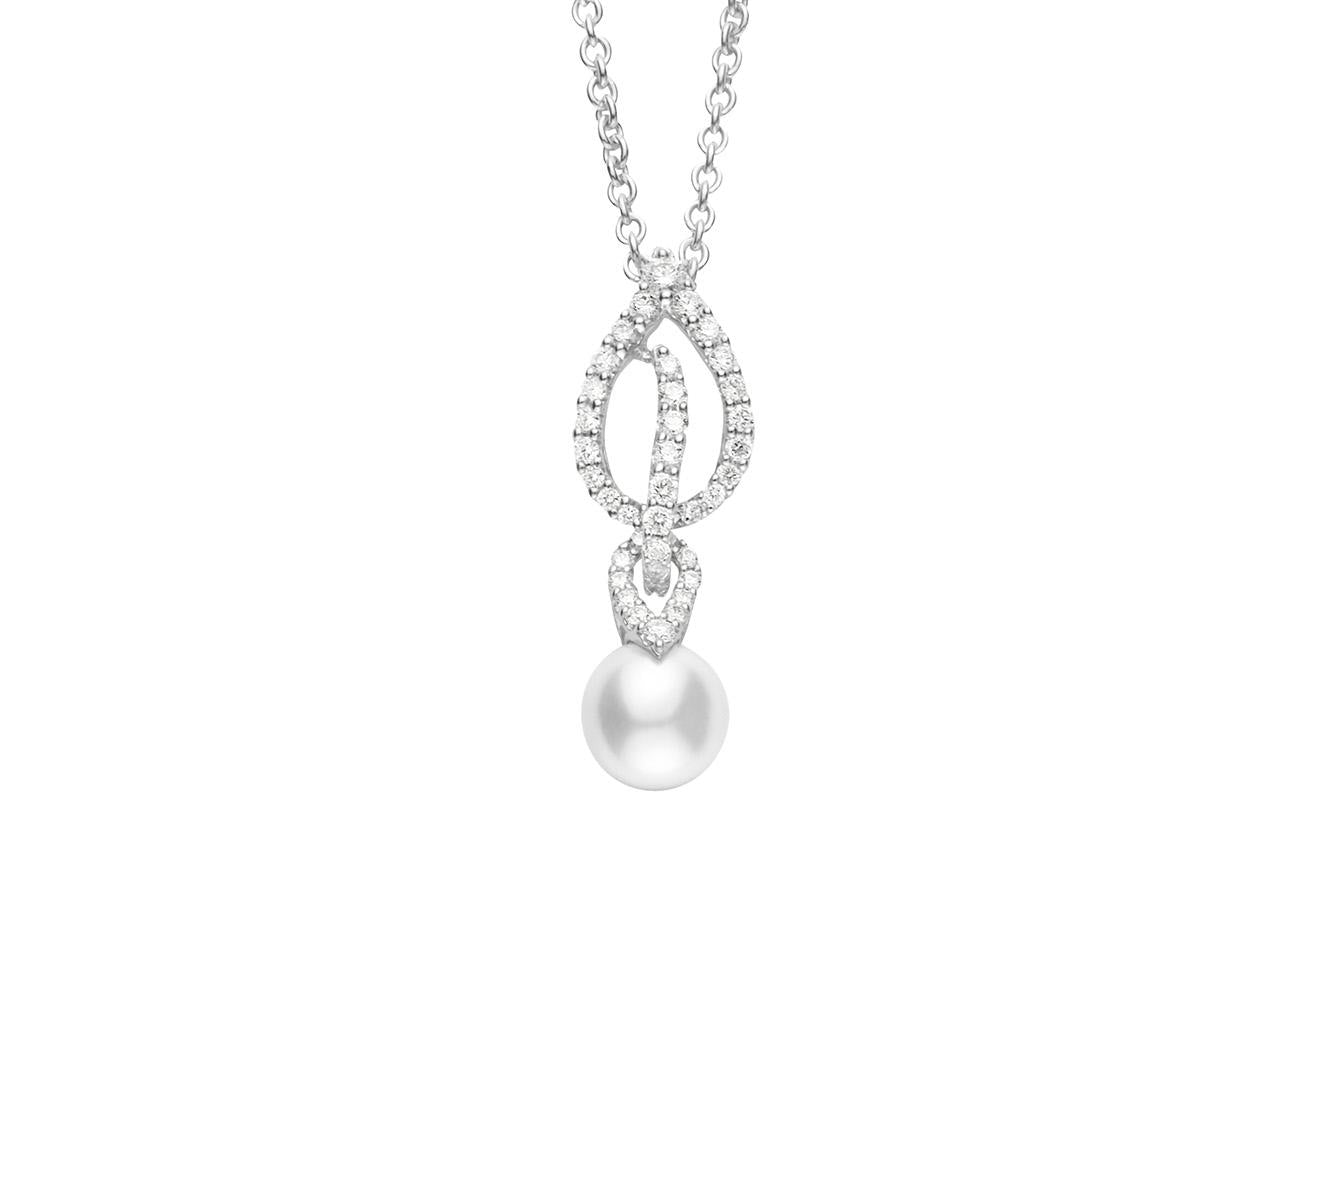 Mikimoto Akoya Cultured Pearl Necklace in White Gold